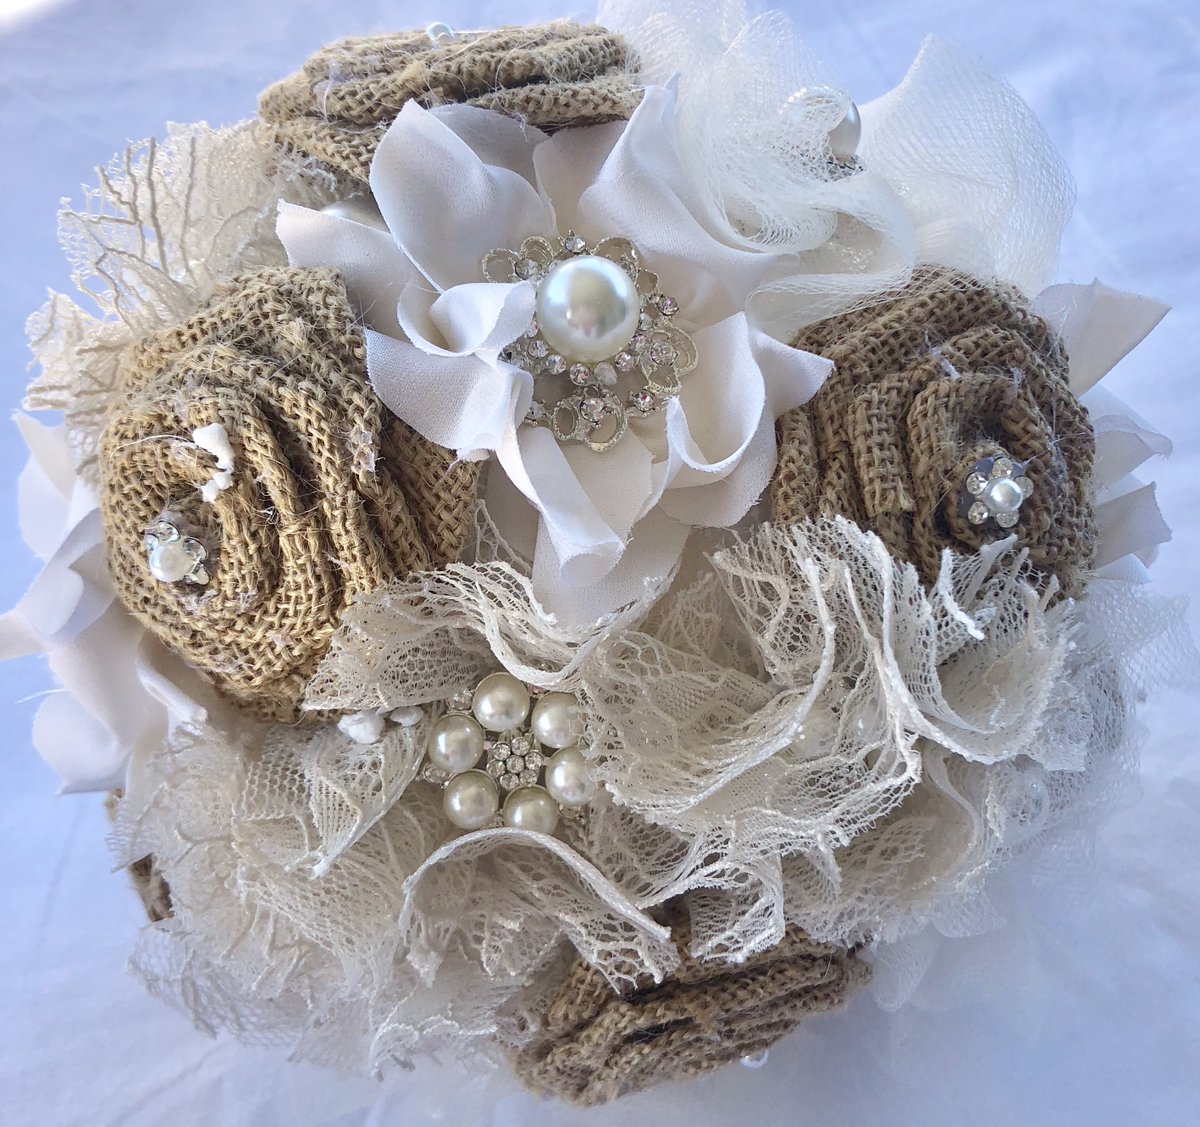 Rustic Boho bridal bouquet with style and bling 😊 @bejewelled_bridal #bridalbouquet #bridalbouquets #rustic #rusticwedding #rusticbohemianwedding #bohowedding #bohoweddingideas #bohobouquet #rusticbouquet #rusticbridalbouquet